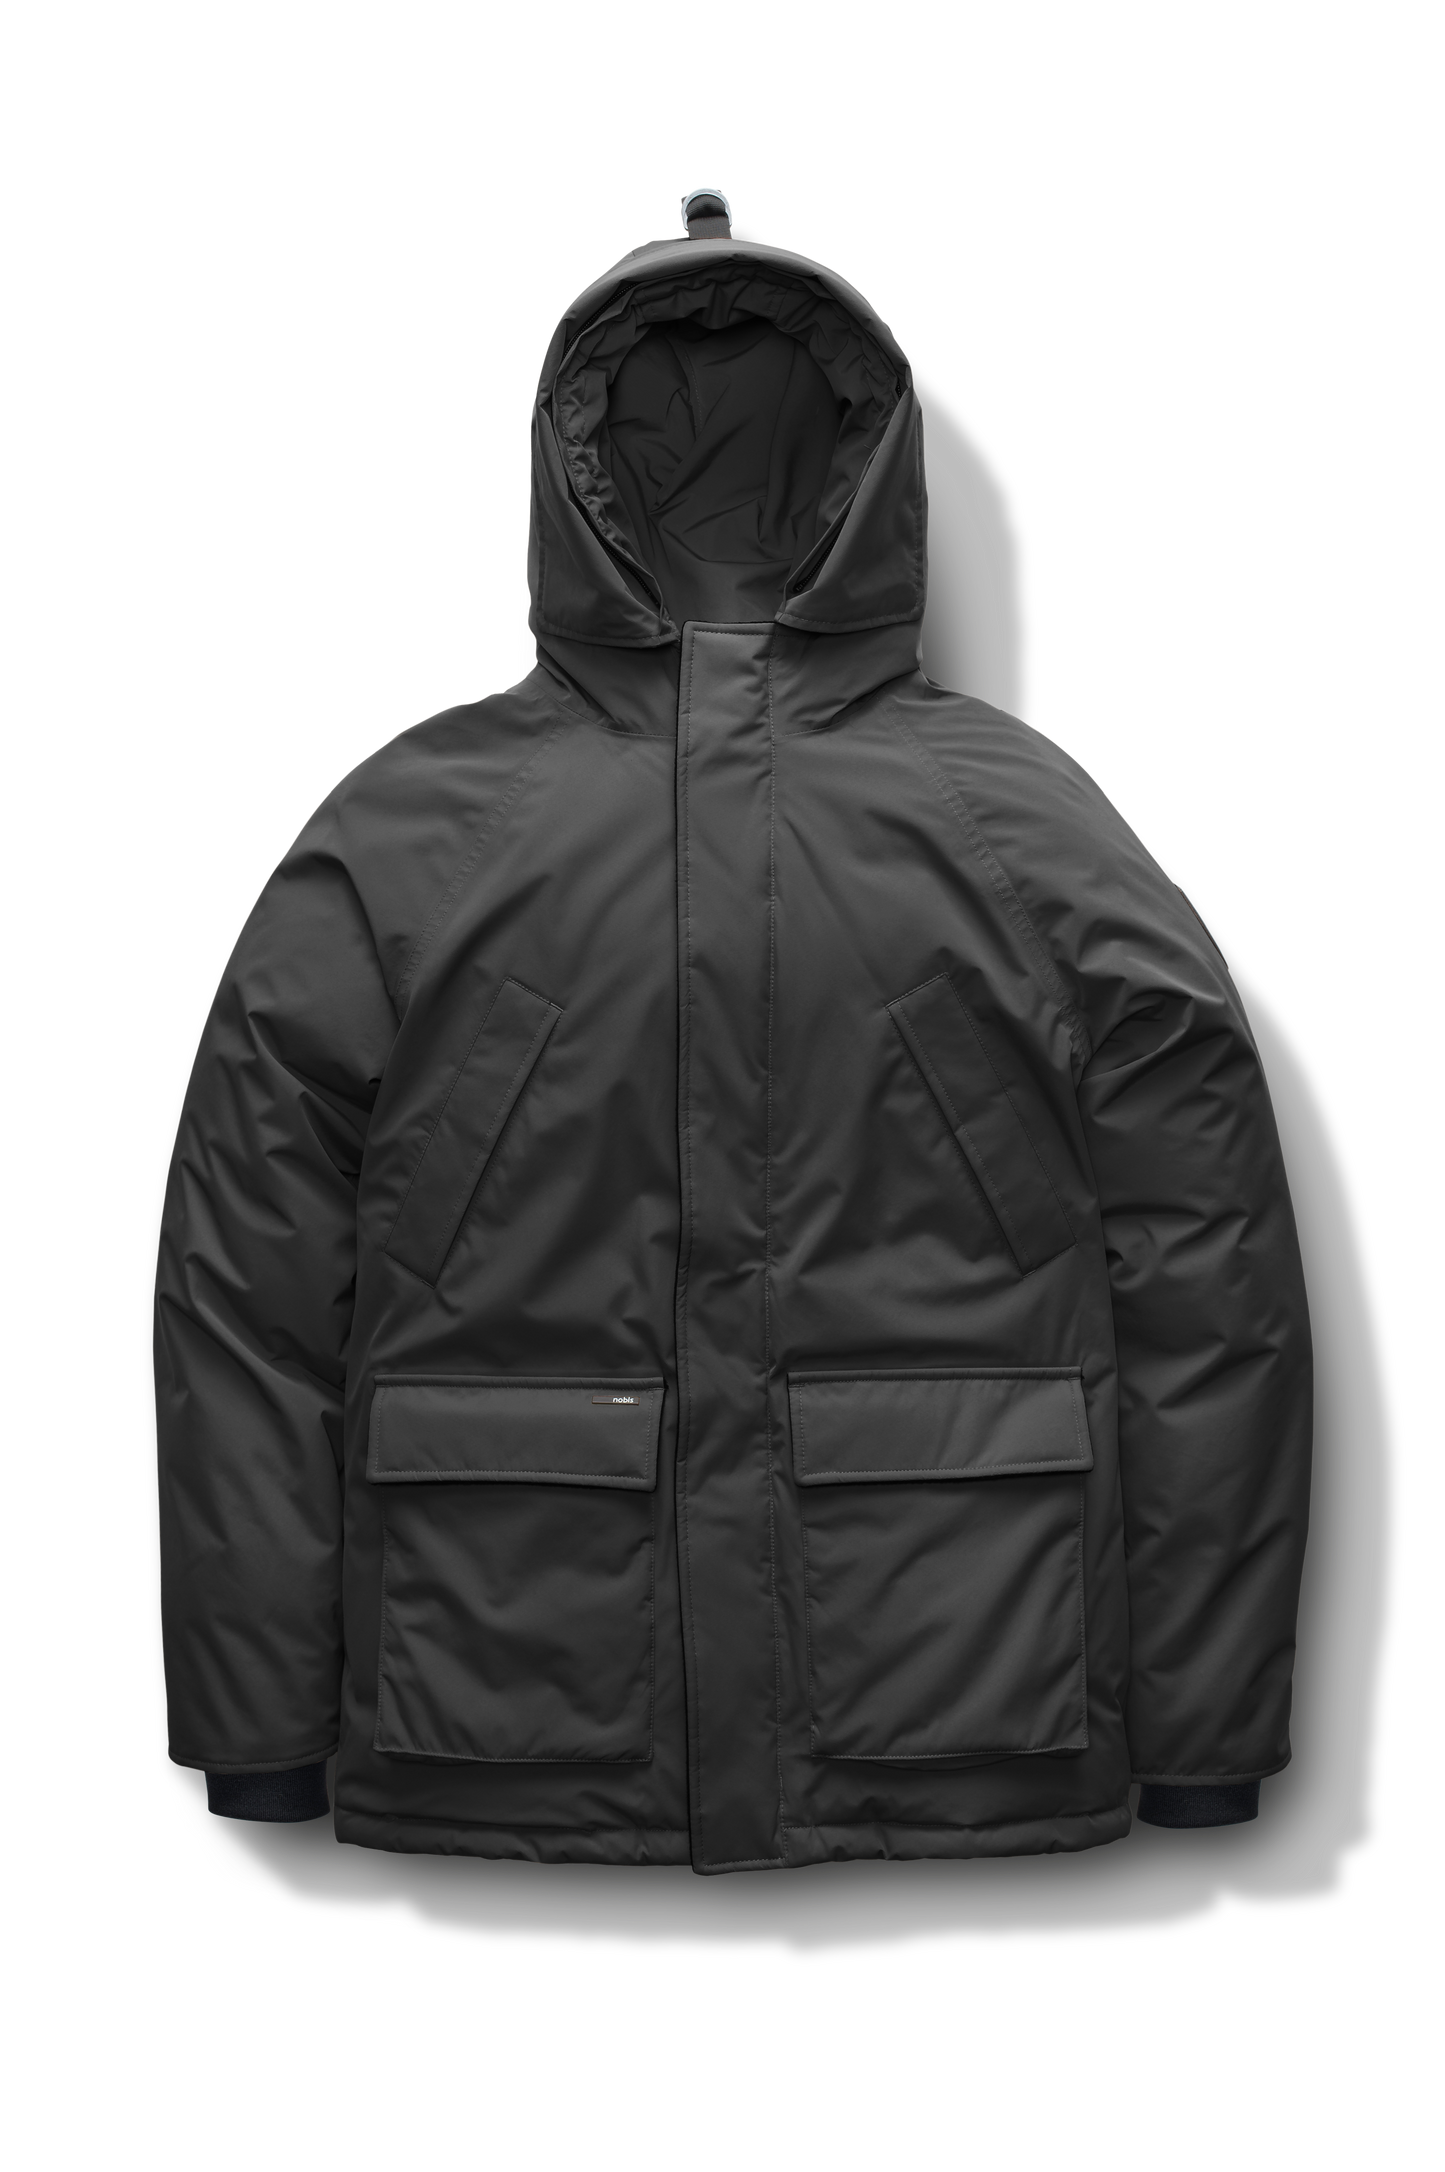 Heritage Furless Men's Parka in hip length, Canadian white duck down insulation, non-removable hood, front zipper with magnetic placket, chest hand warmer pockets, waist flap pockets, and elastic cuffs, in Black